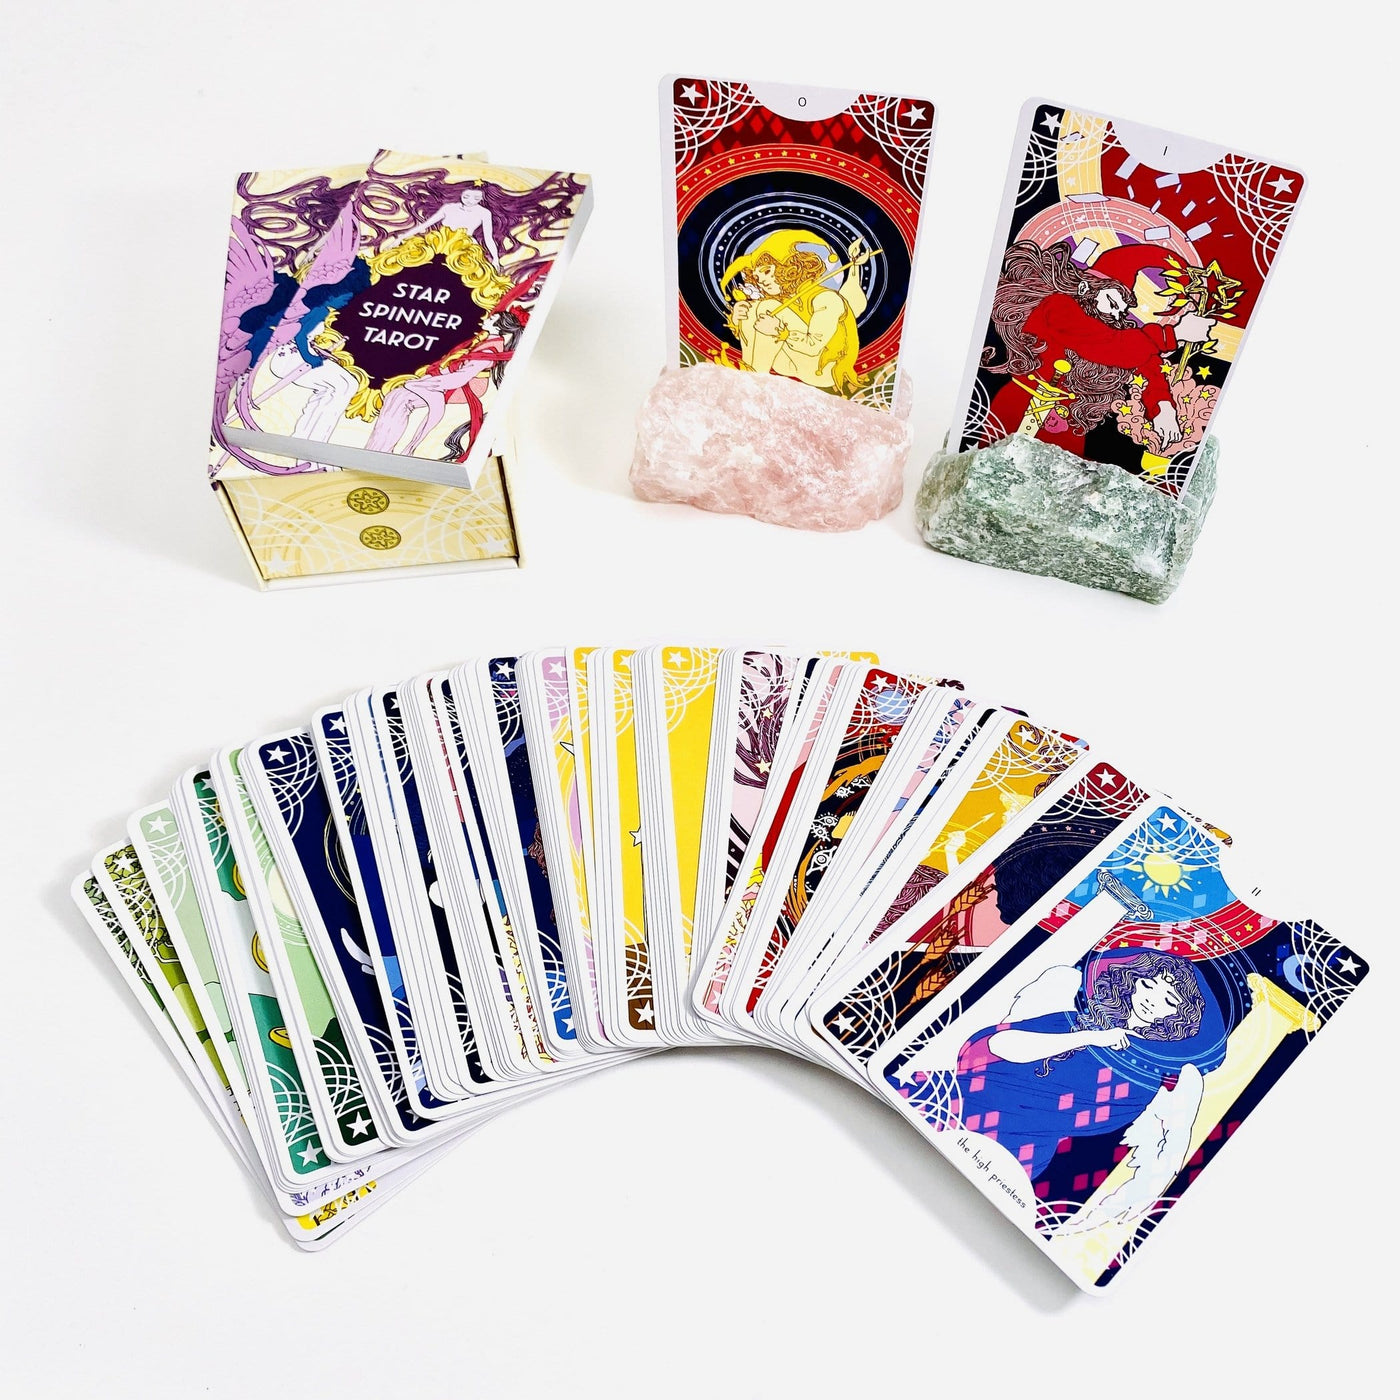 Star Spinner Tarot Card deck comes in a box with various card images 